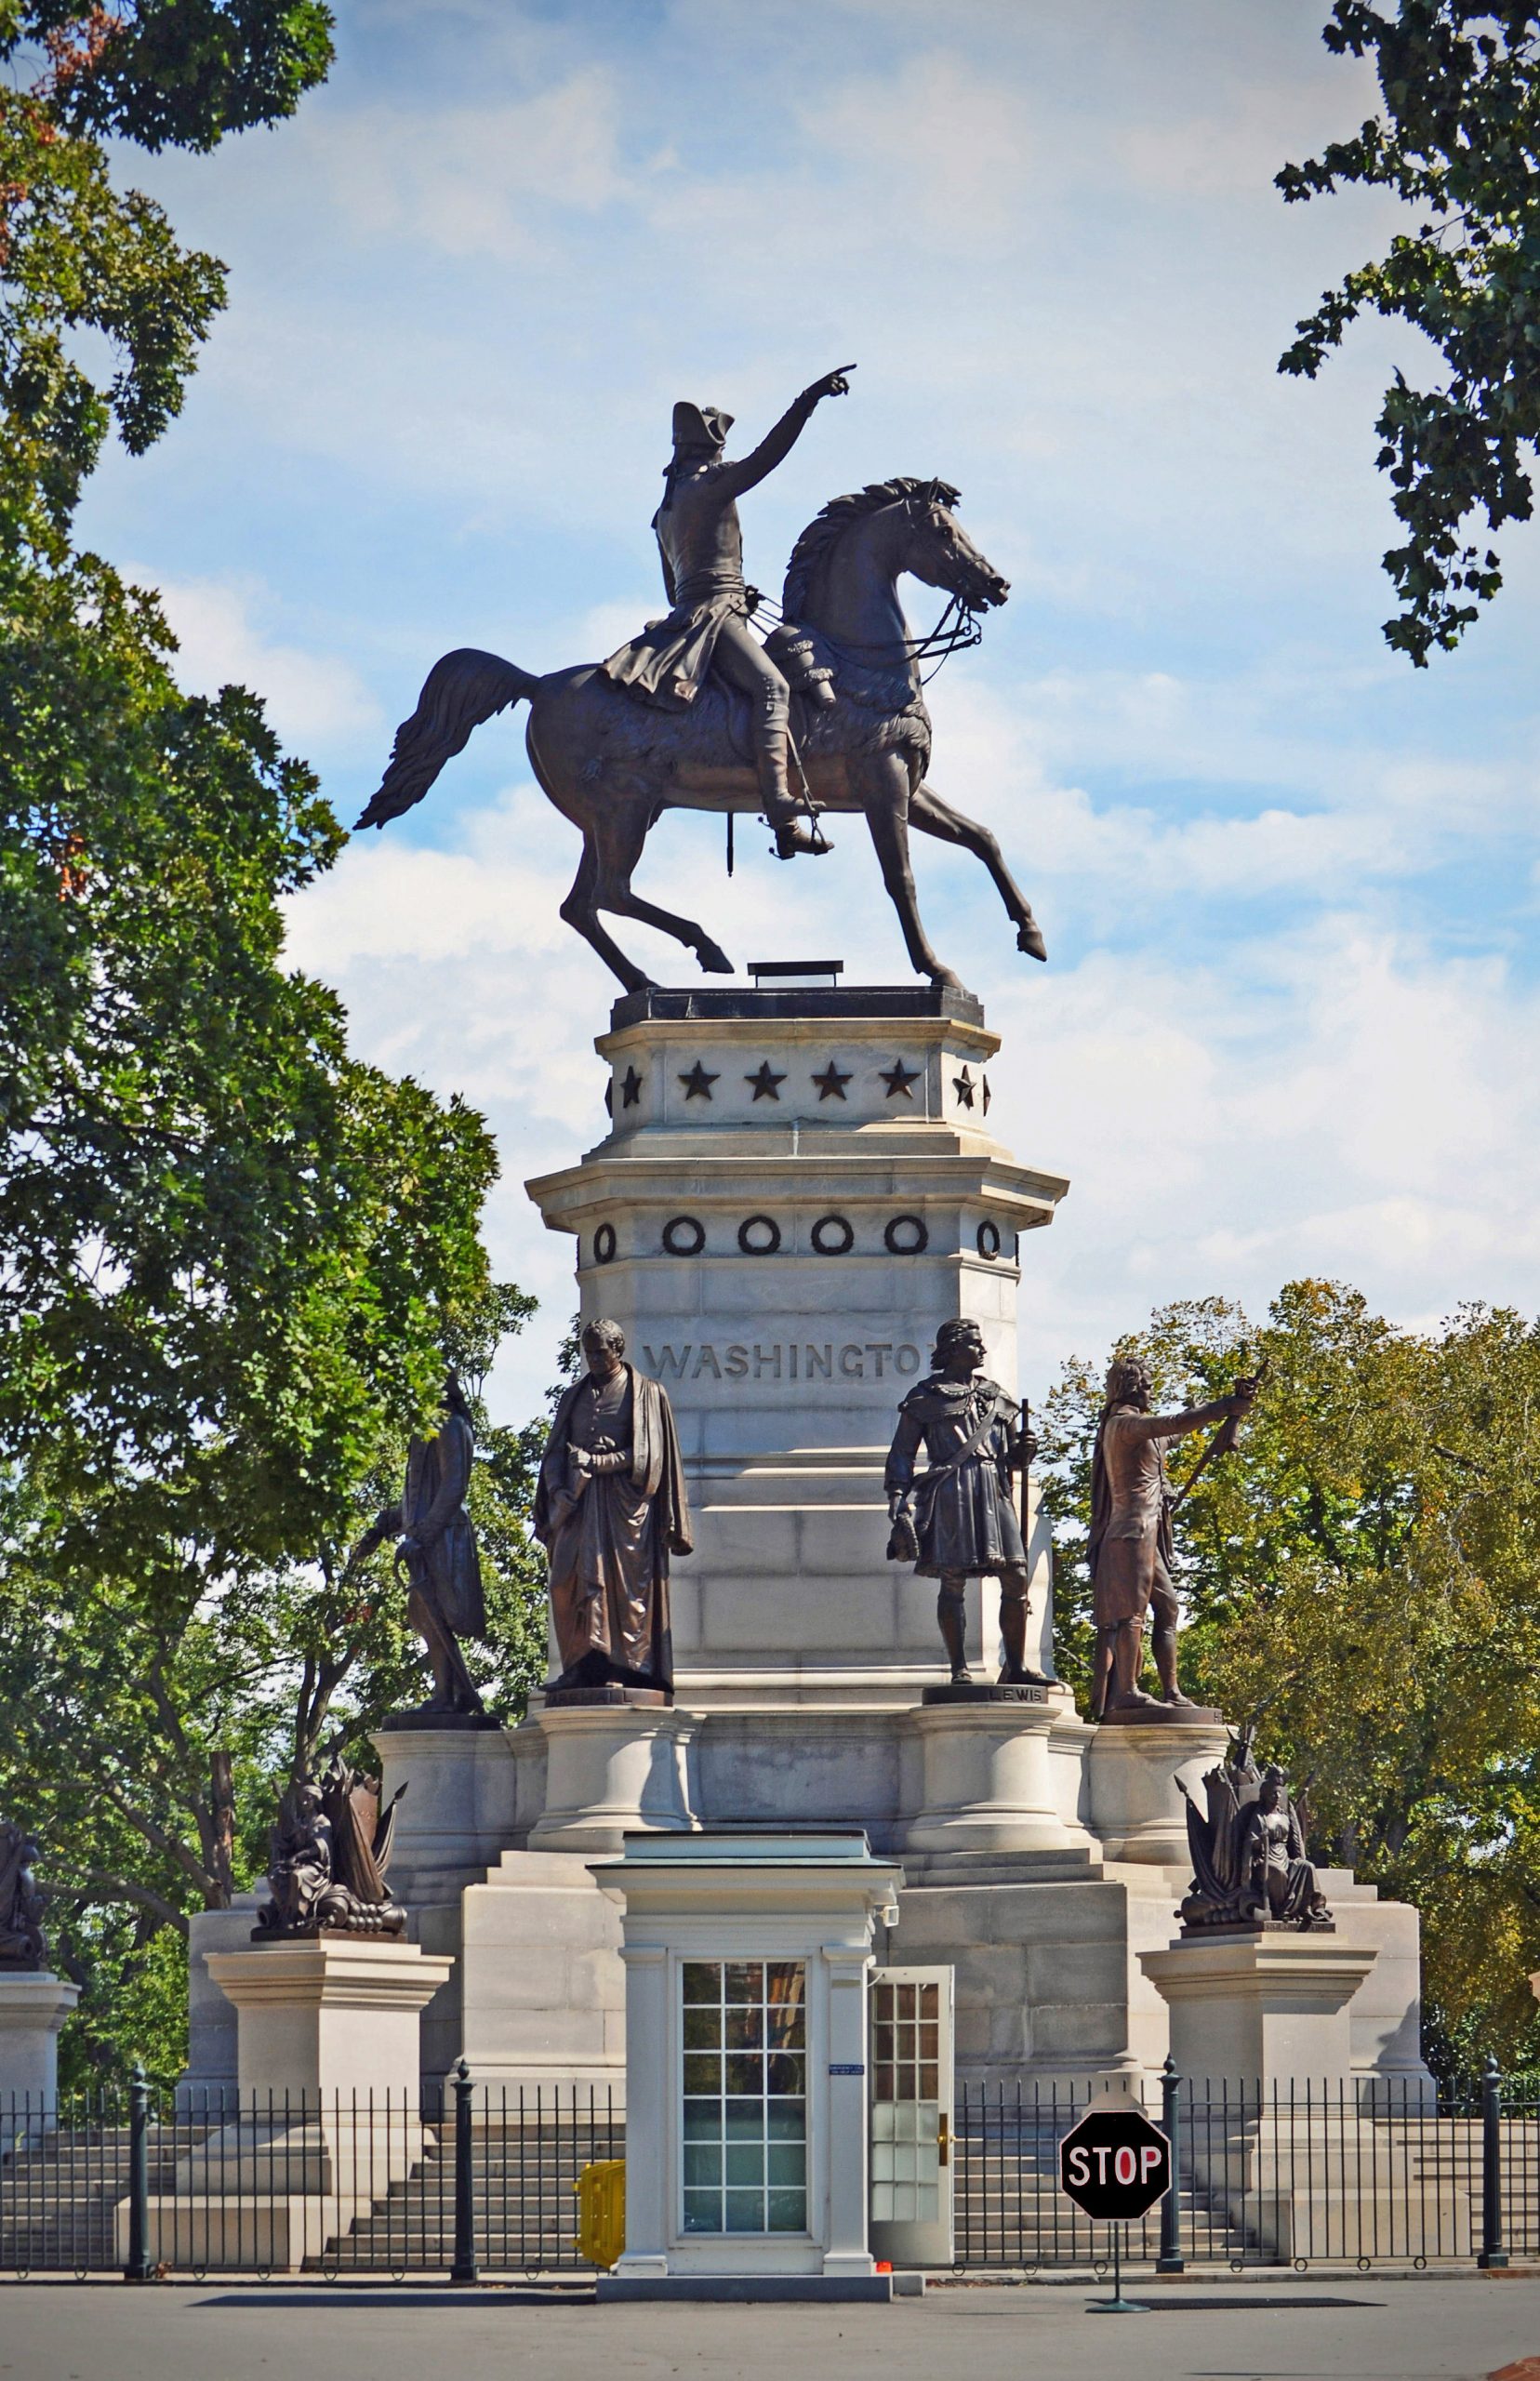 127-0189_Washington_Equestrian_Statue_2021_Setting_VLR_Online-scaled